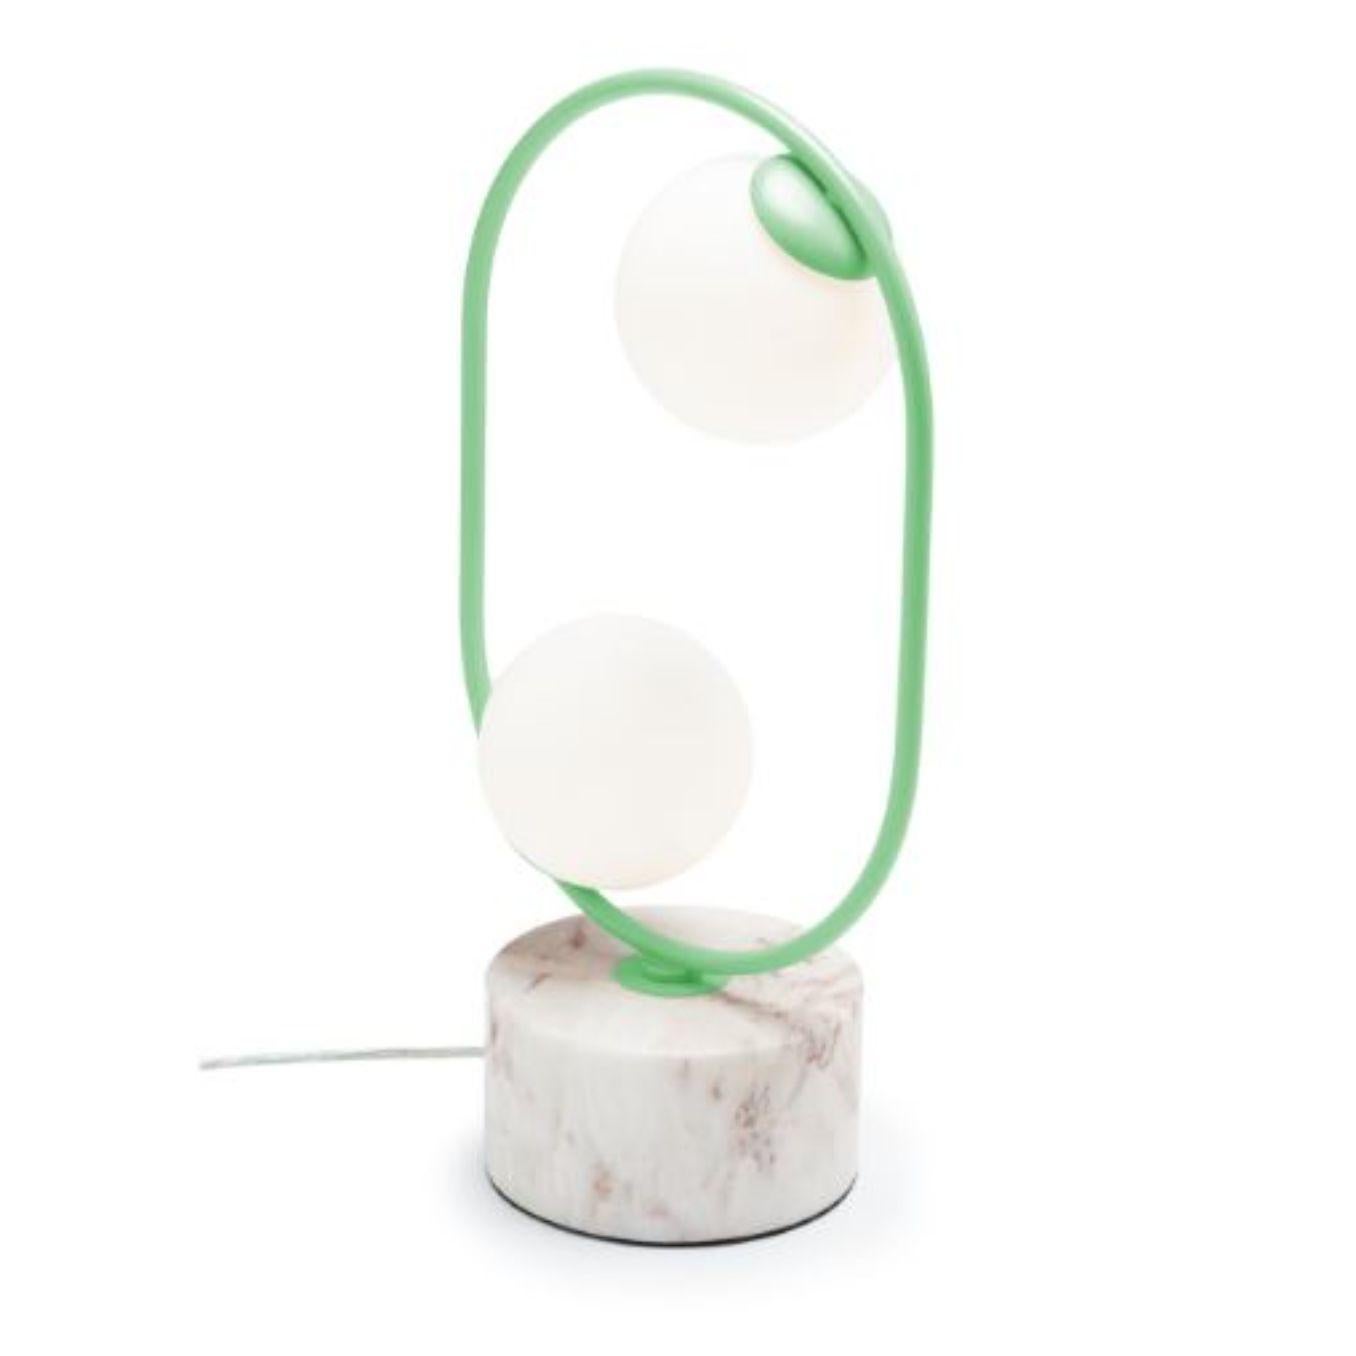 Dream Loop table I lamp with Marble Base by Dooq
Dimensions: W 30 x D 15 x H 50 cm
Materials: lacquered metal, polished or brushed metal, marble.
Also available in different colors and materials. 

Information:
230V/50Hz
2 x max. G9
4W